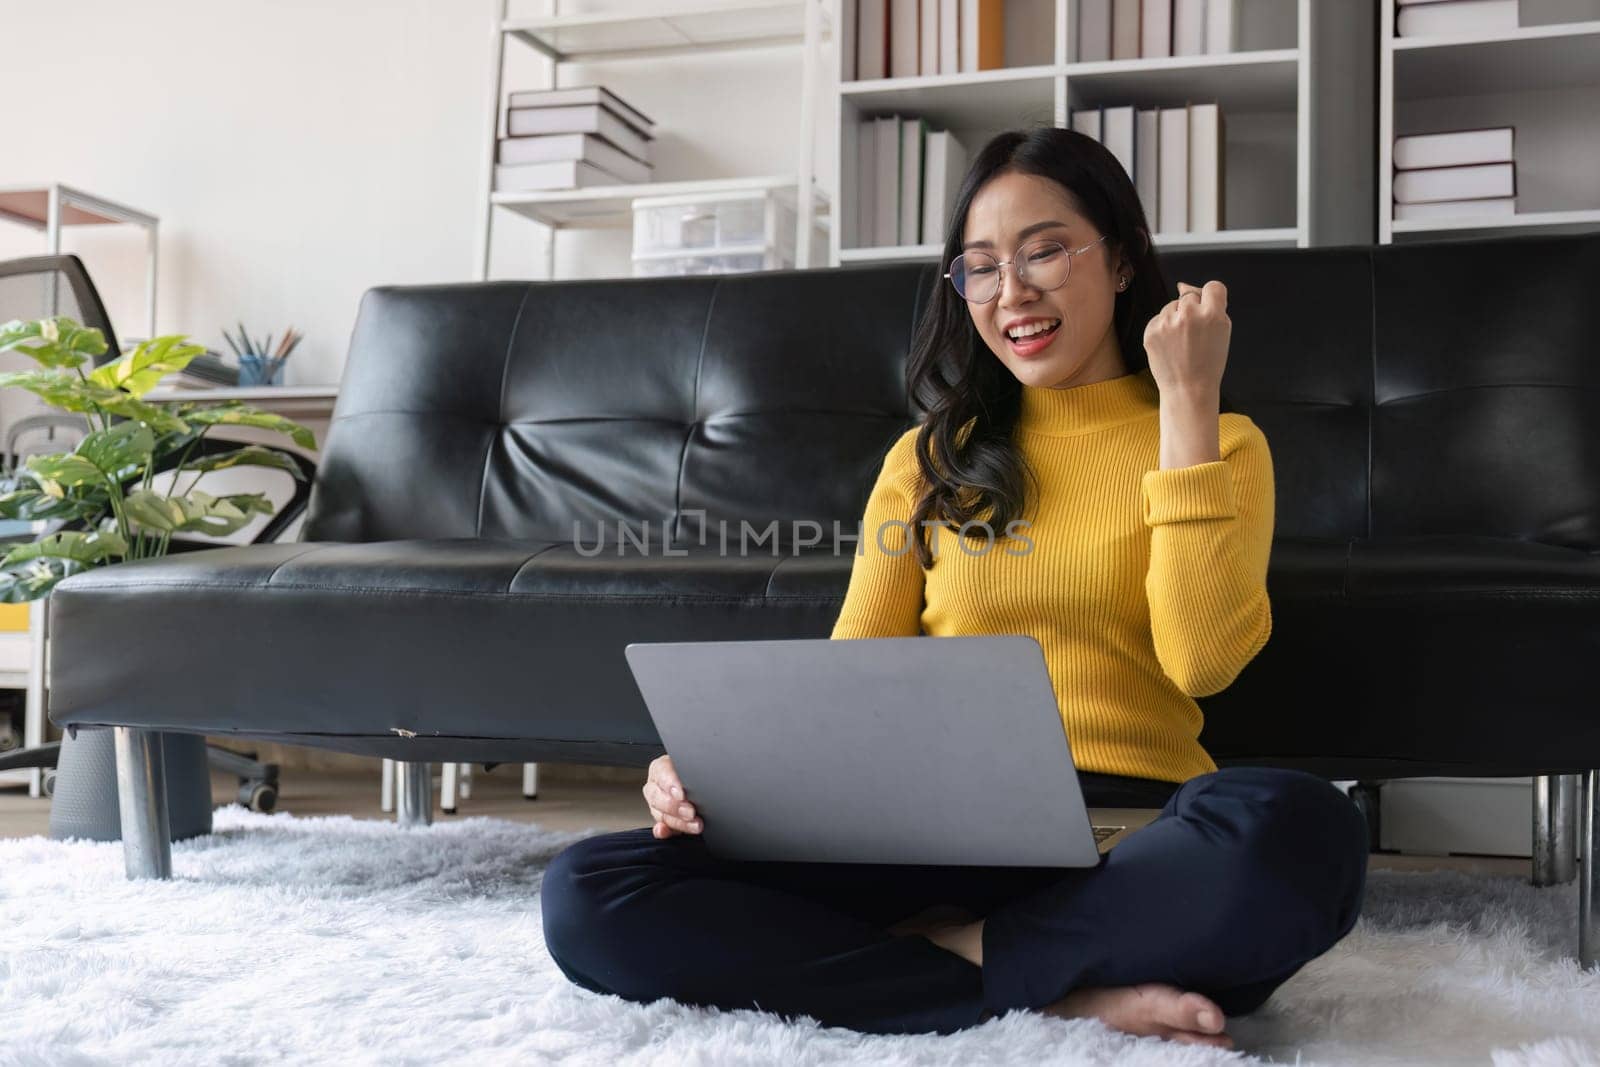 euphoric young asian woman celebrating winning or getting ecommerce shopping offer on computer laptop. Excited happy girl winner looking at laptop celebrating success.